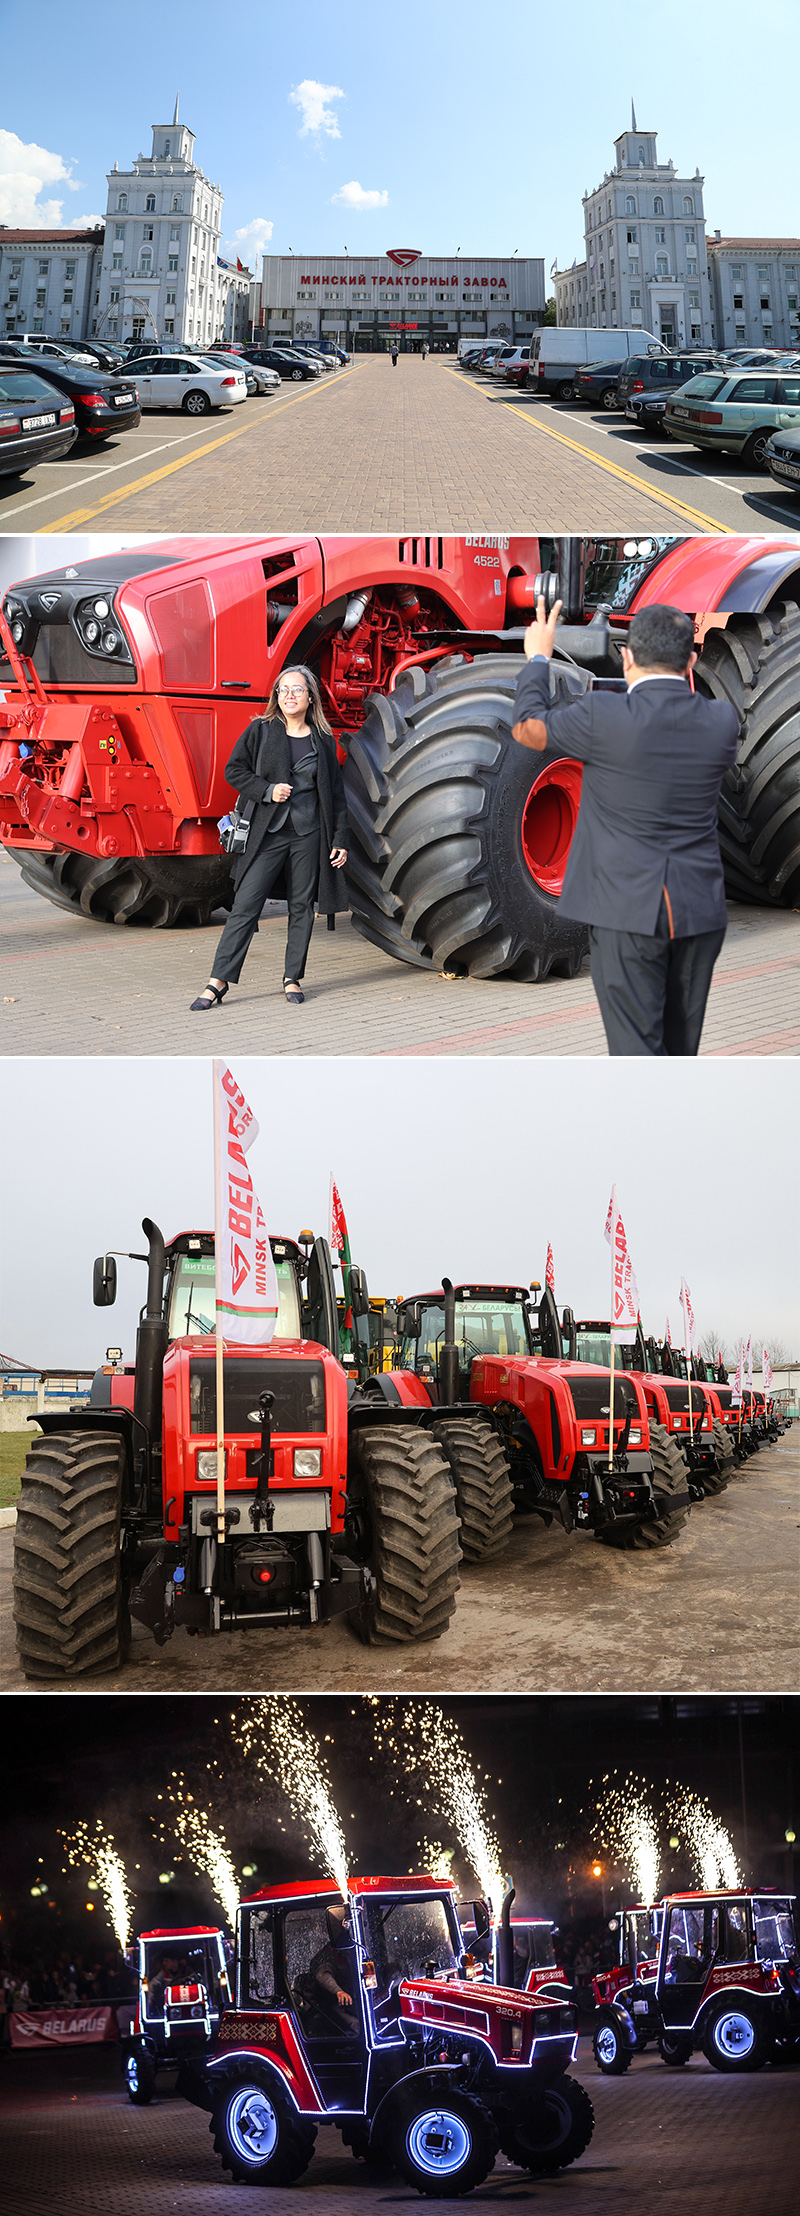 The Belarusian tractor manufacturing company MTZ